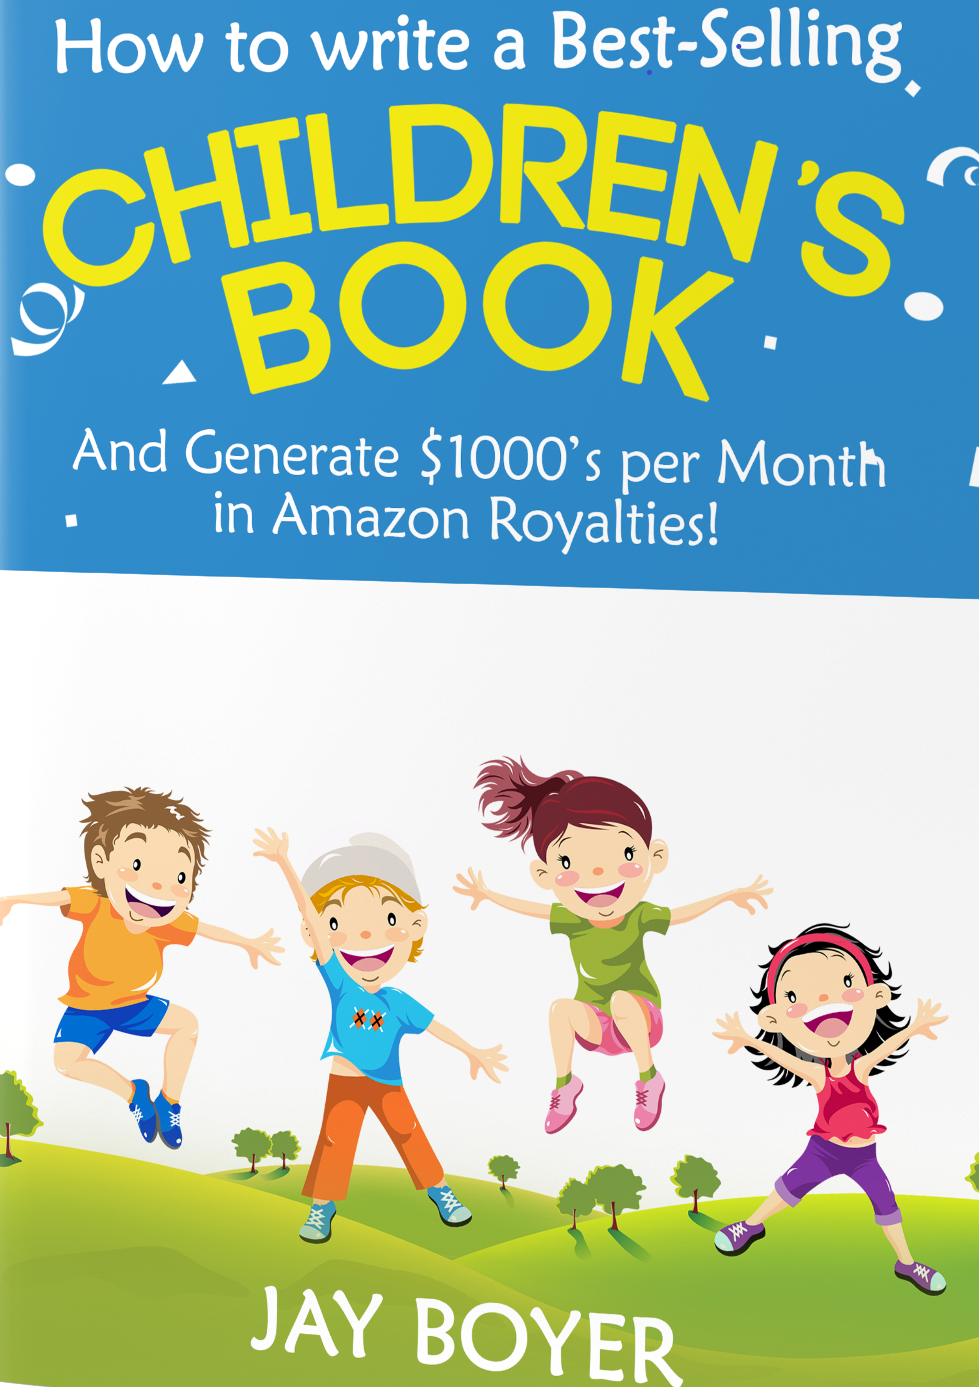 How To Write A Bestselling Children’s Book On Amazon? Best Course For Beginners